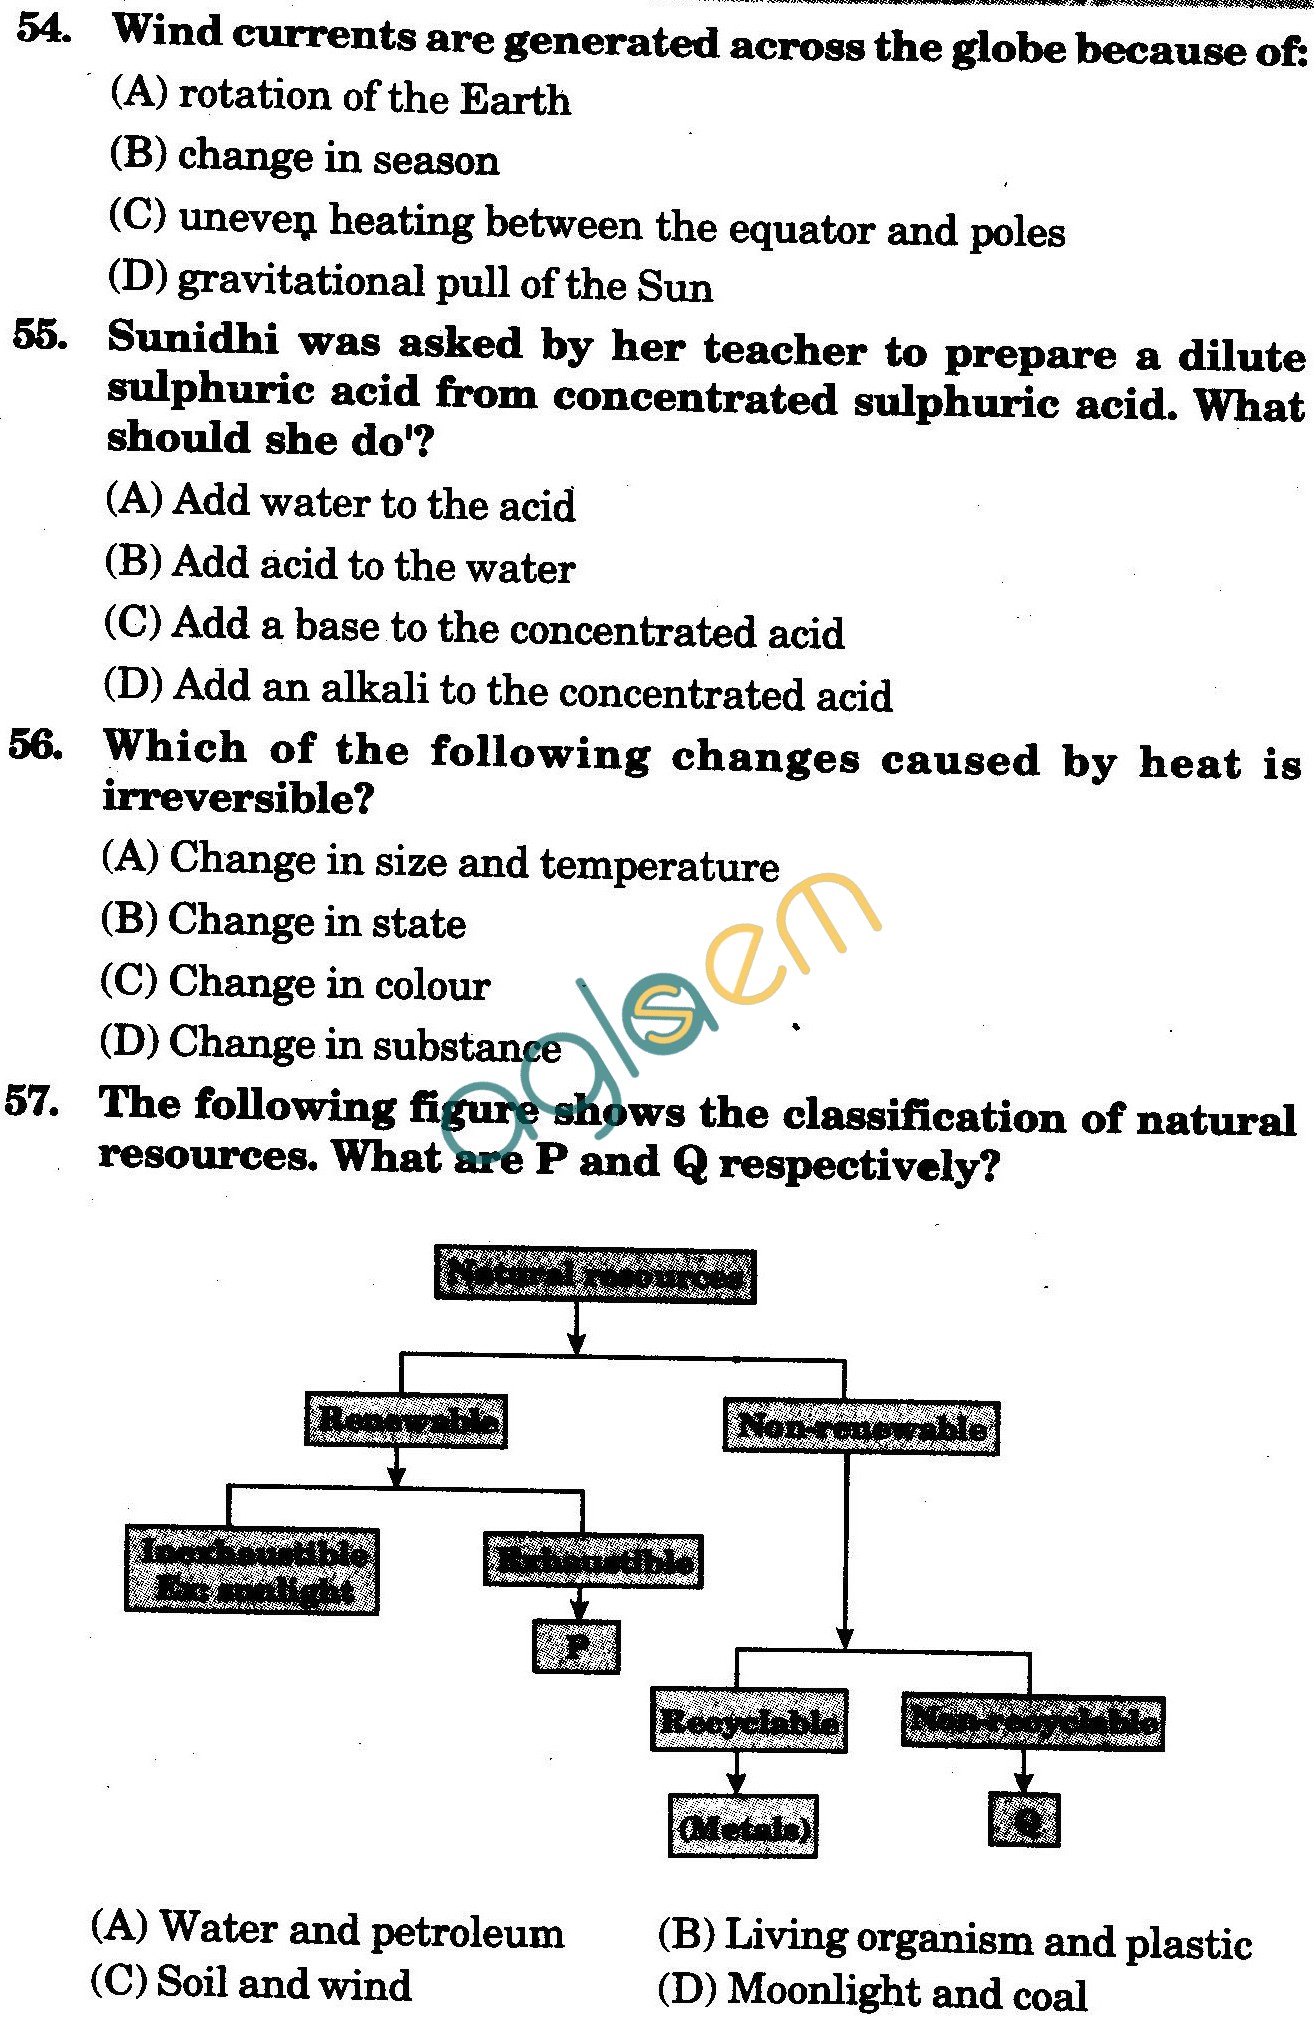 NSTSE 2009 Class VII Question Paper with Answers - Chemistry